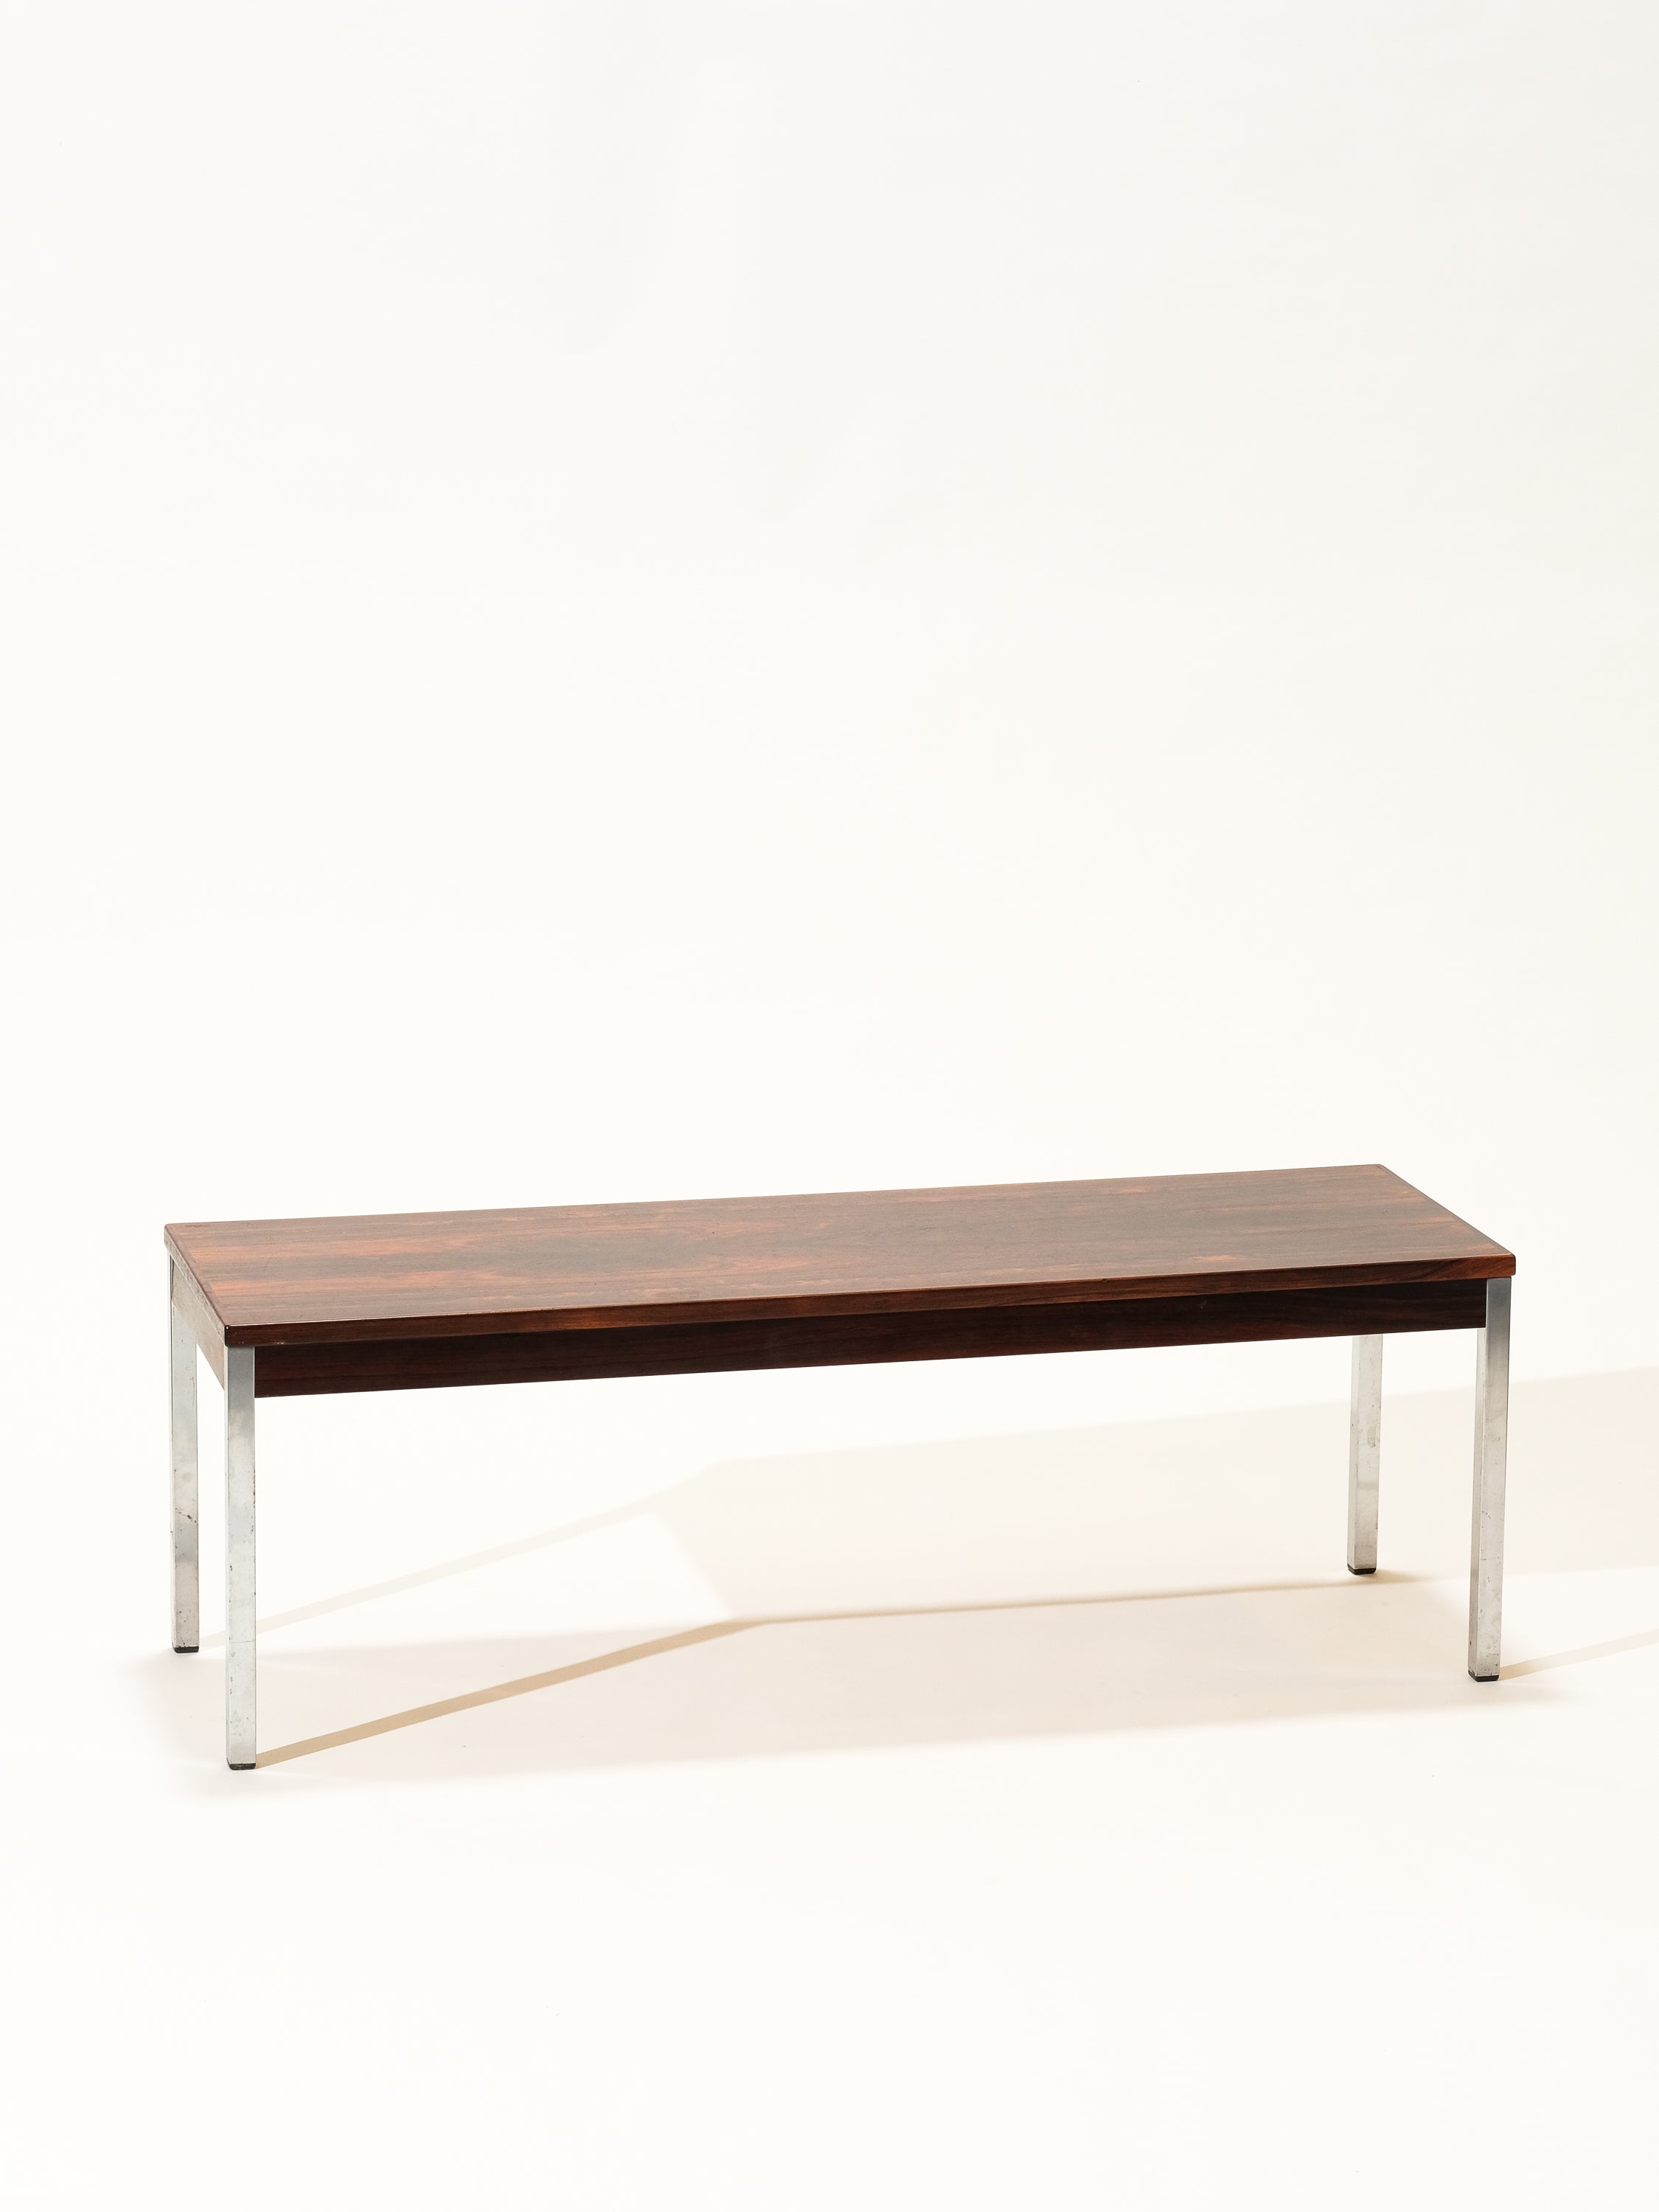 Bench / Side Table in Rosewood and Chrome by HMB Möbler, 1970s